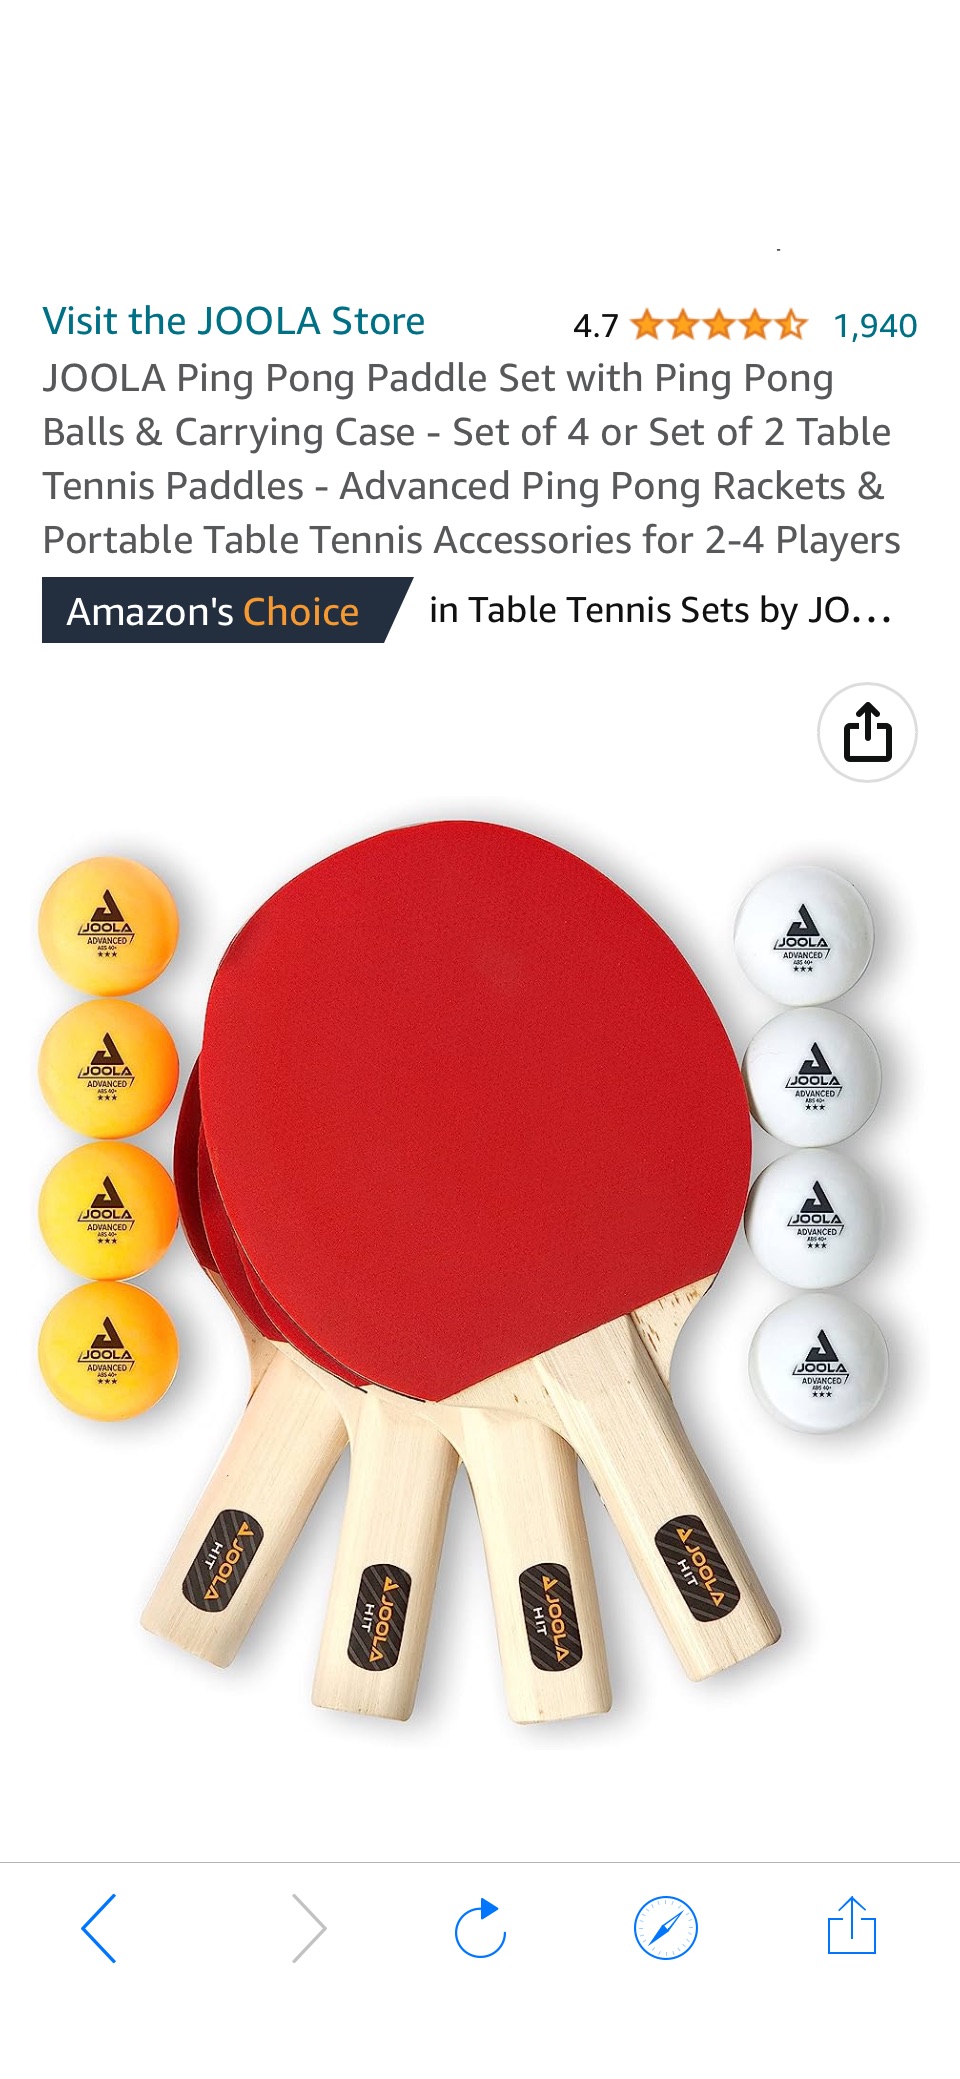 Amazon.com: JOOLA All-in-One Indoor Table Tennis Hit Set (Bundle Includes 4 Rackets/Paddles, 8 Balls, Carrying Case), Multi, One Size (59152) : Everything Else原价39.99